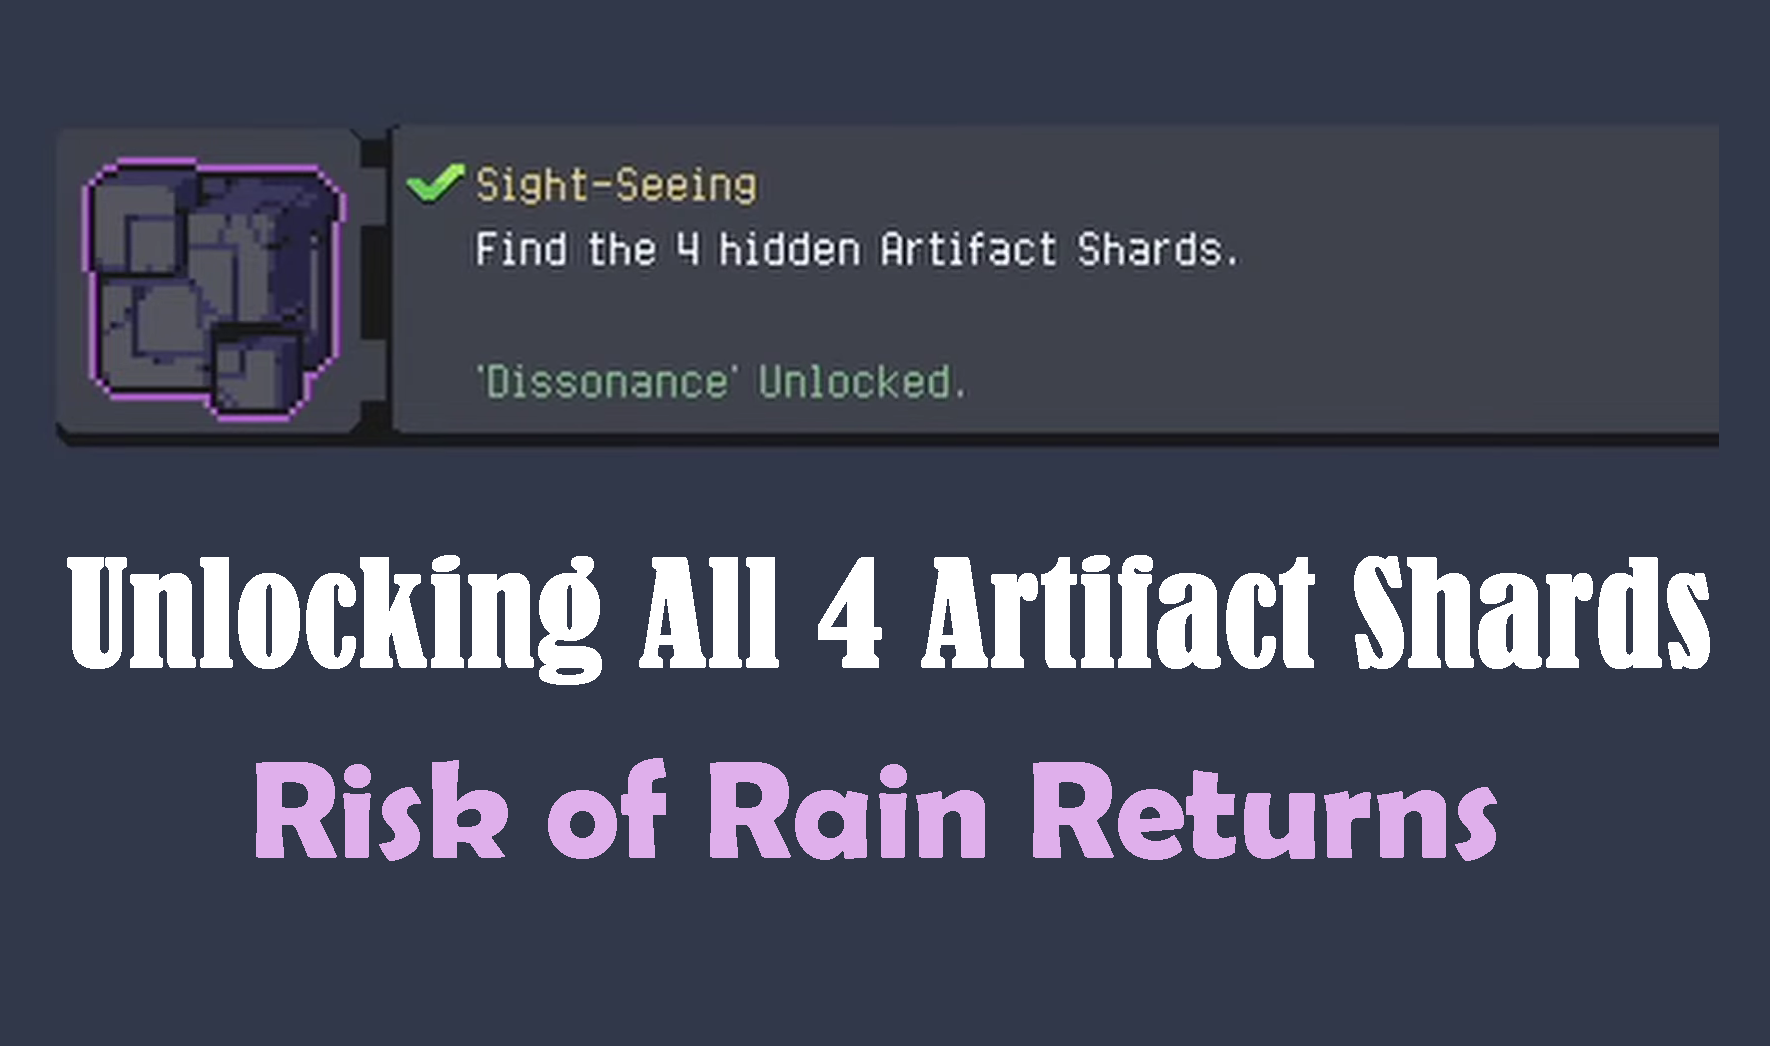 How to Find All Artifact Shards in Risk of Rain Returns